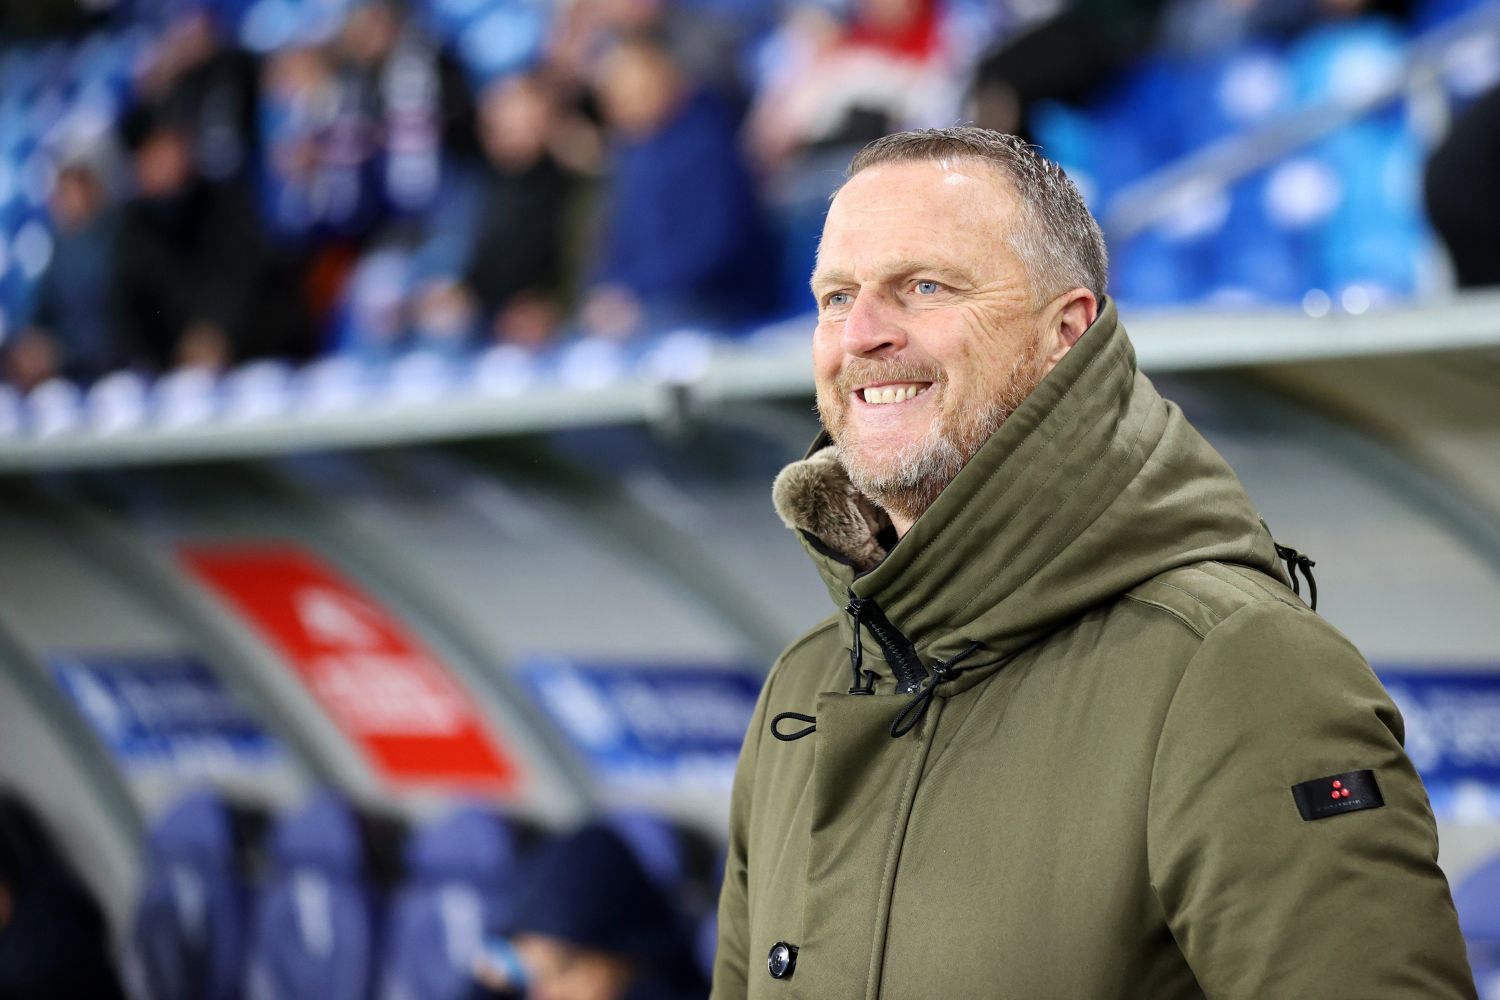 Lech Poznań with an interesting transition within the Ekstraklasa?  John van den Broome comments on the rumours